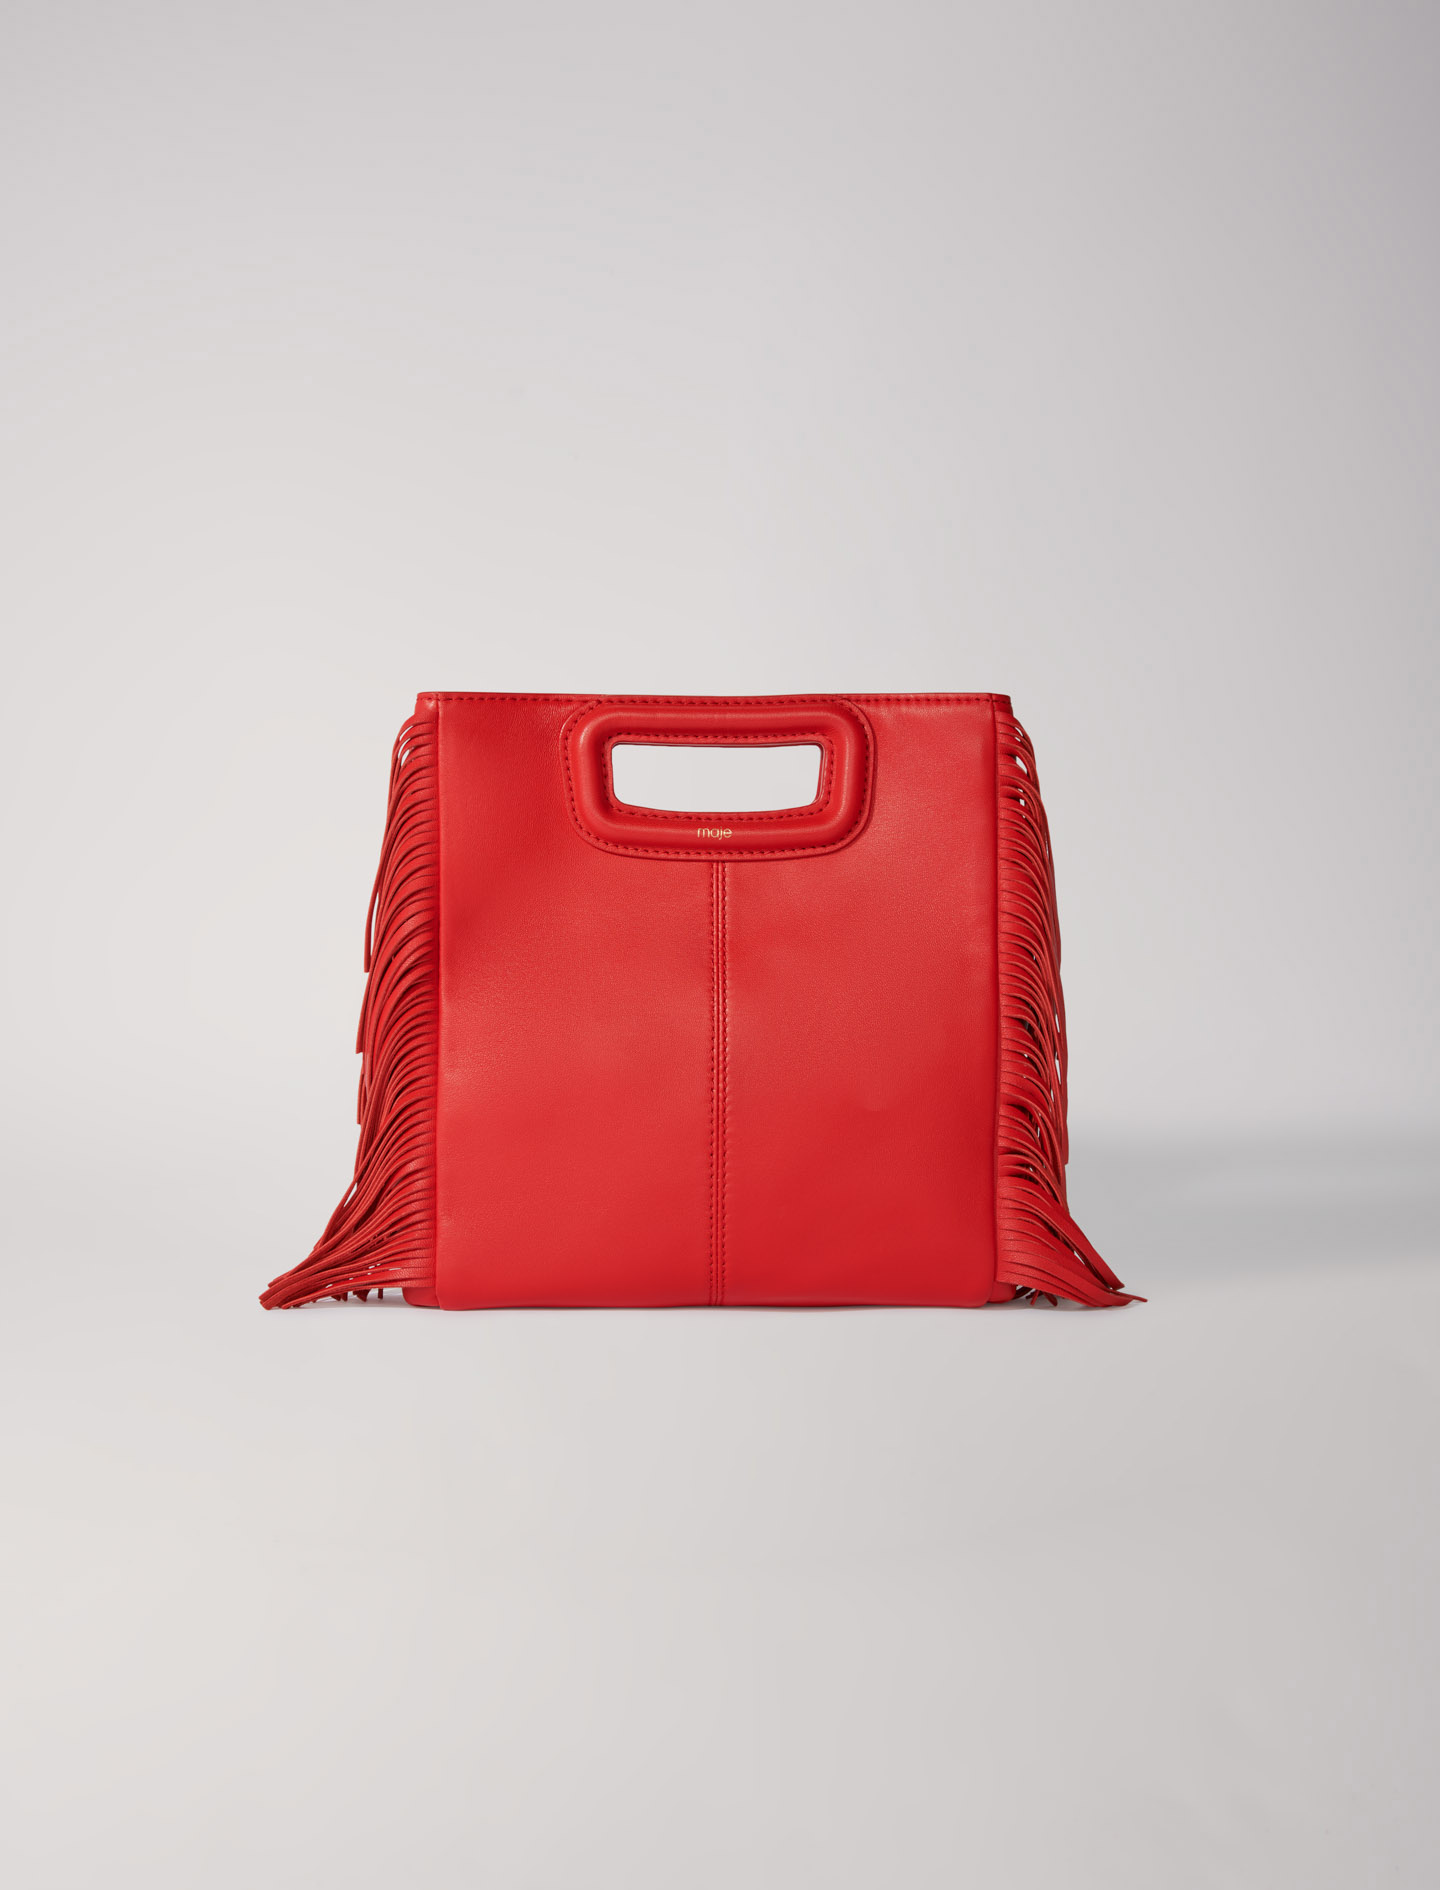 Maje Woman's polyester Leather: Smooth leather M bag with fringing for Fall/Winter, in color Red / Red